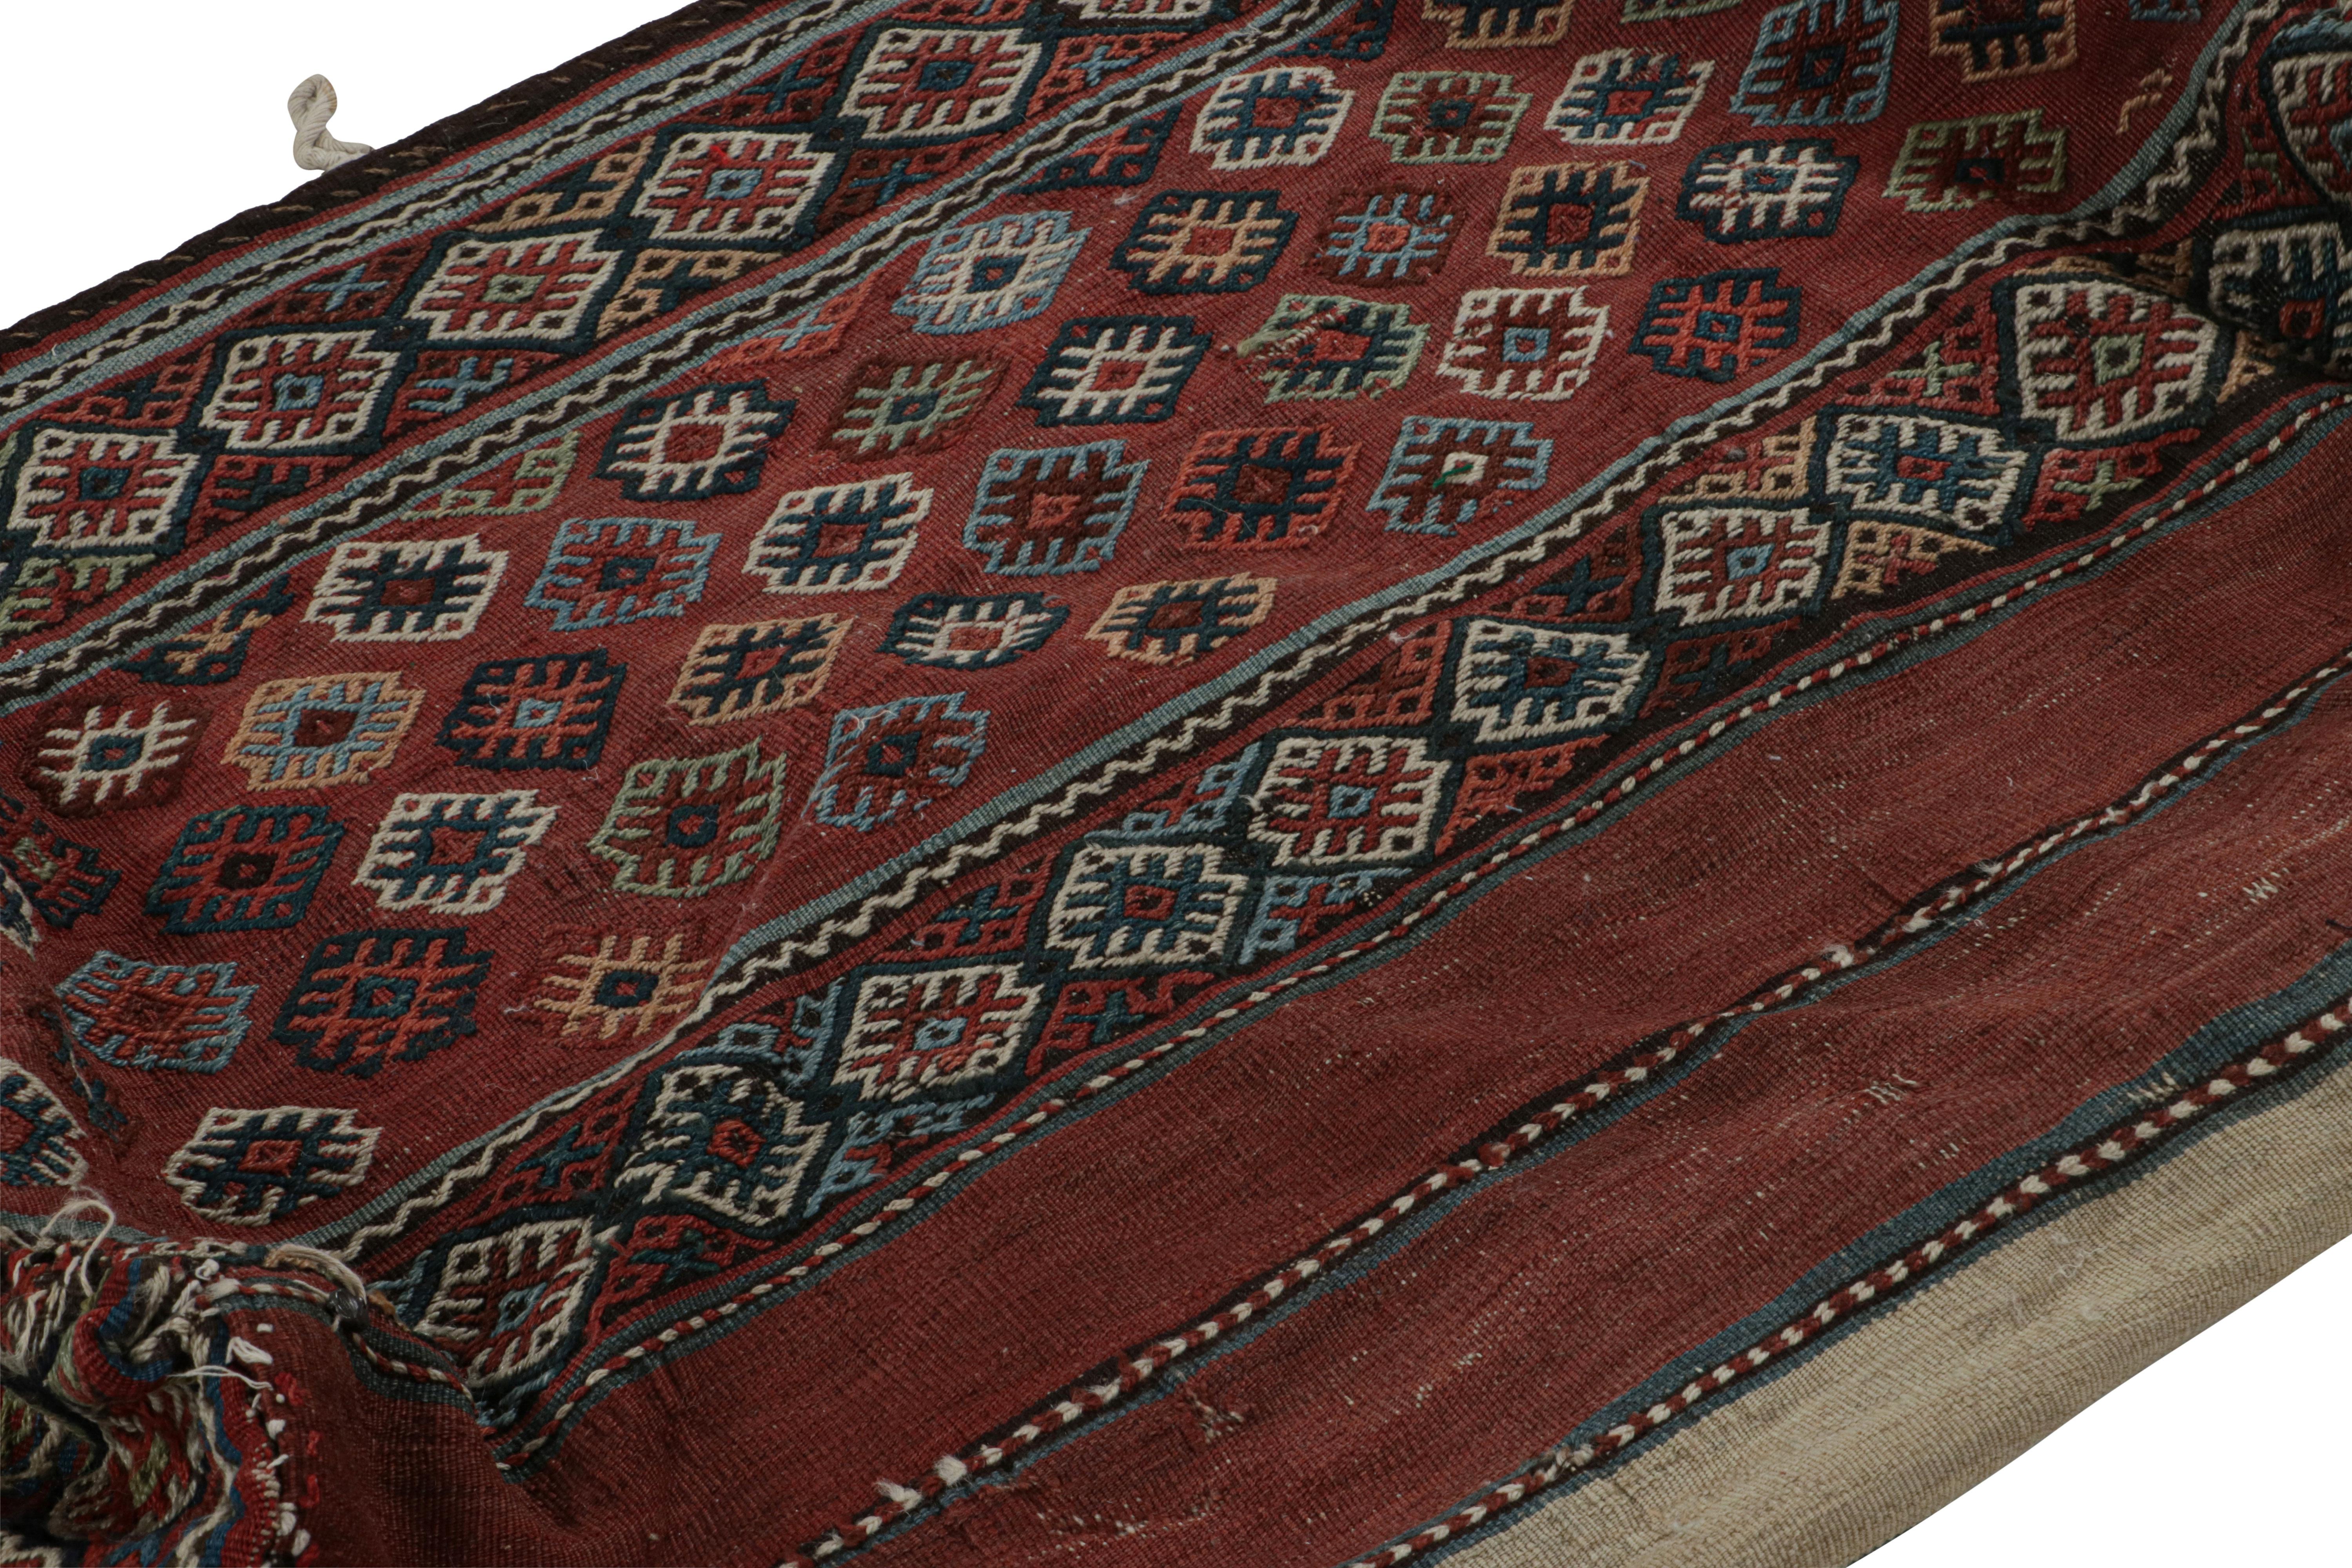 Hand-Knotted Antique Turkish Bag Kilim in Red with Geometric Patterns, from Rug & Kilim For Sale